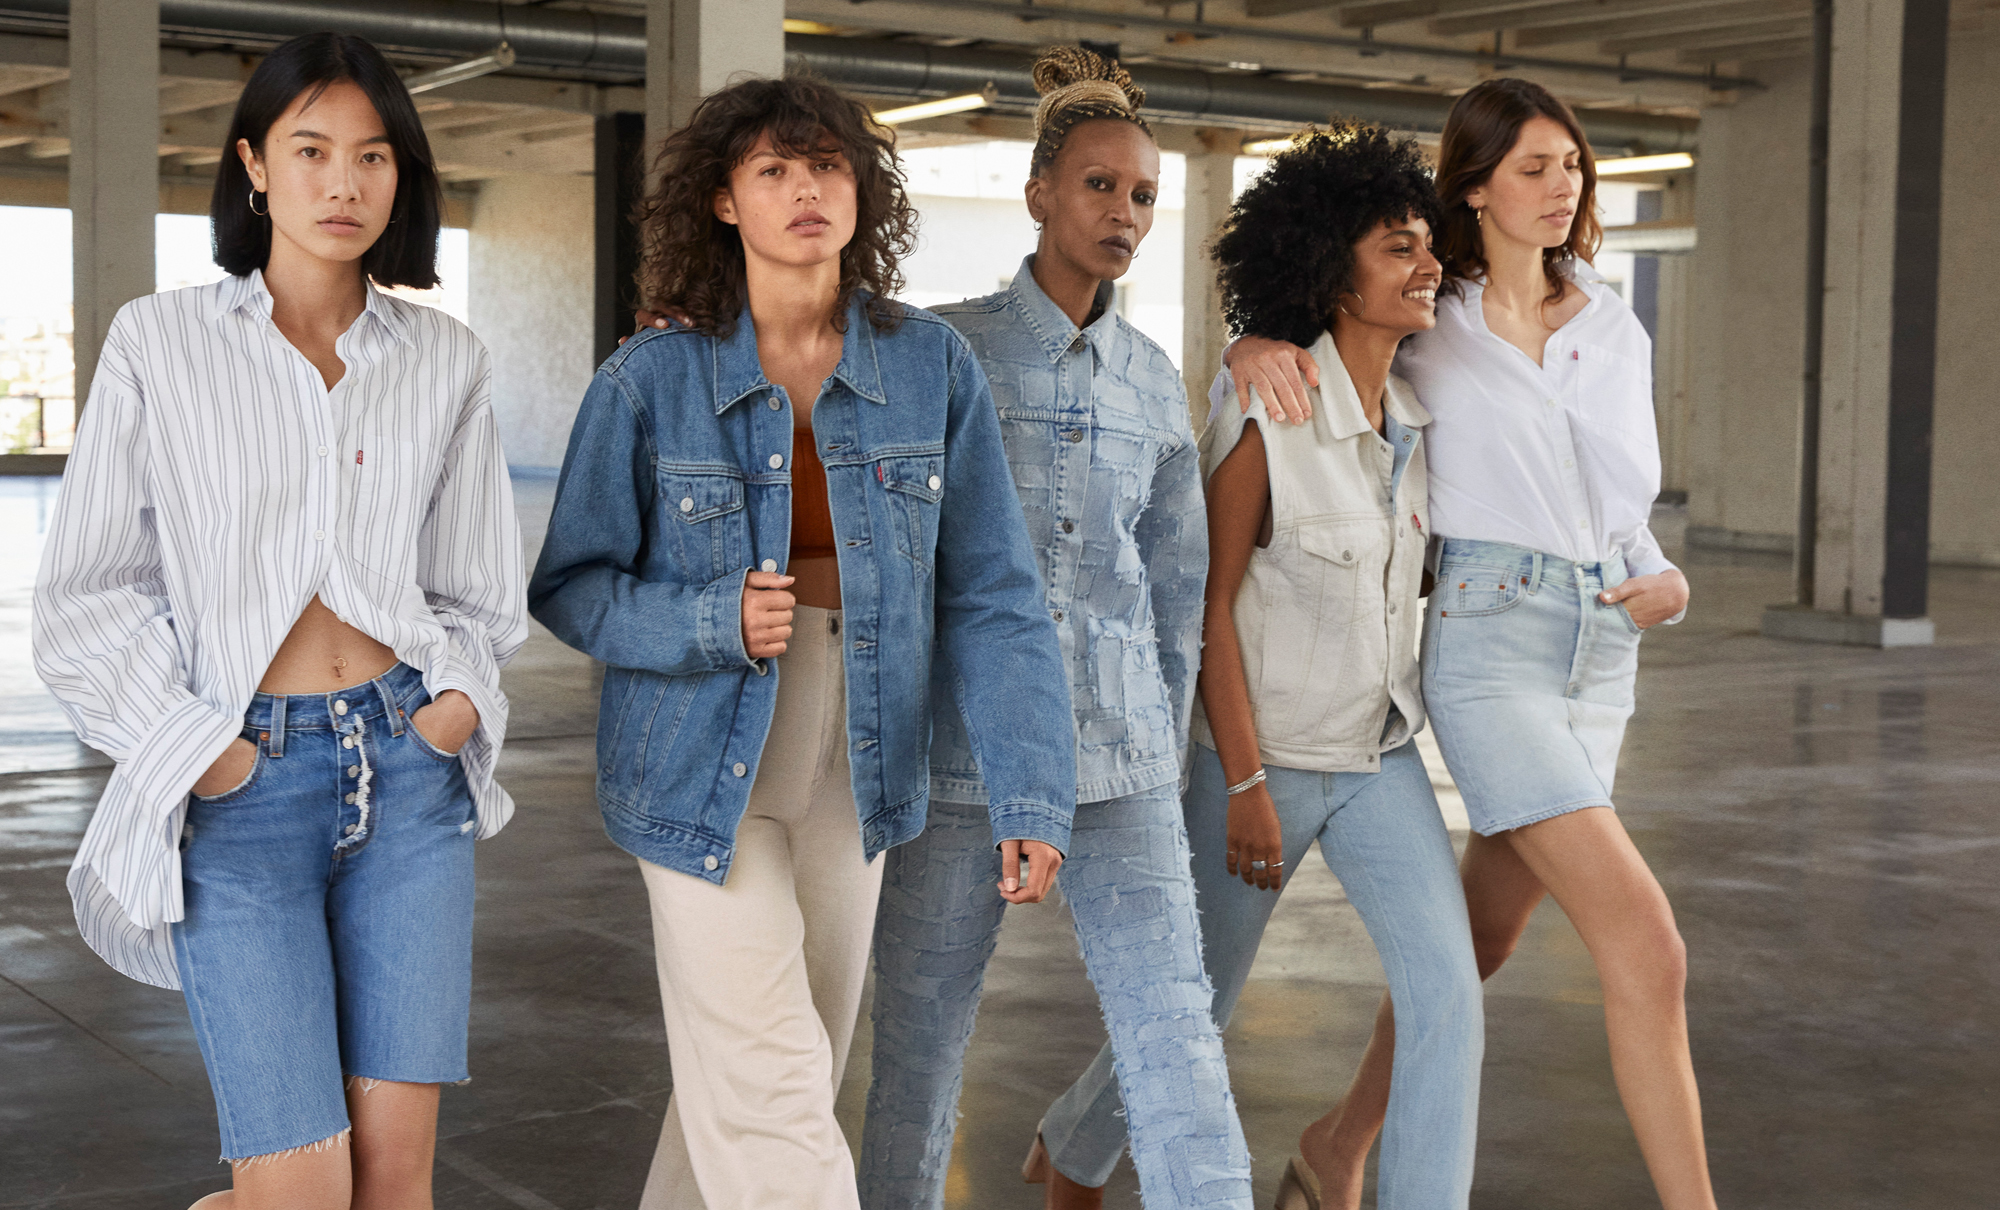 Europe Campaign Seeks to “Win With Her” - Levi & Co : Levi Strauss Co